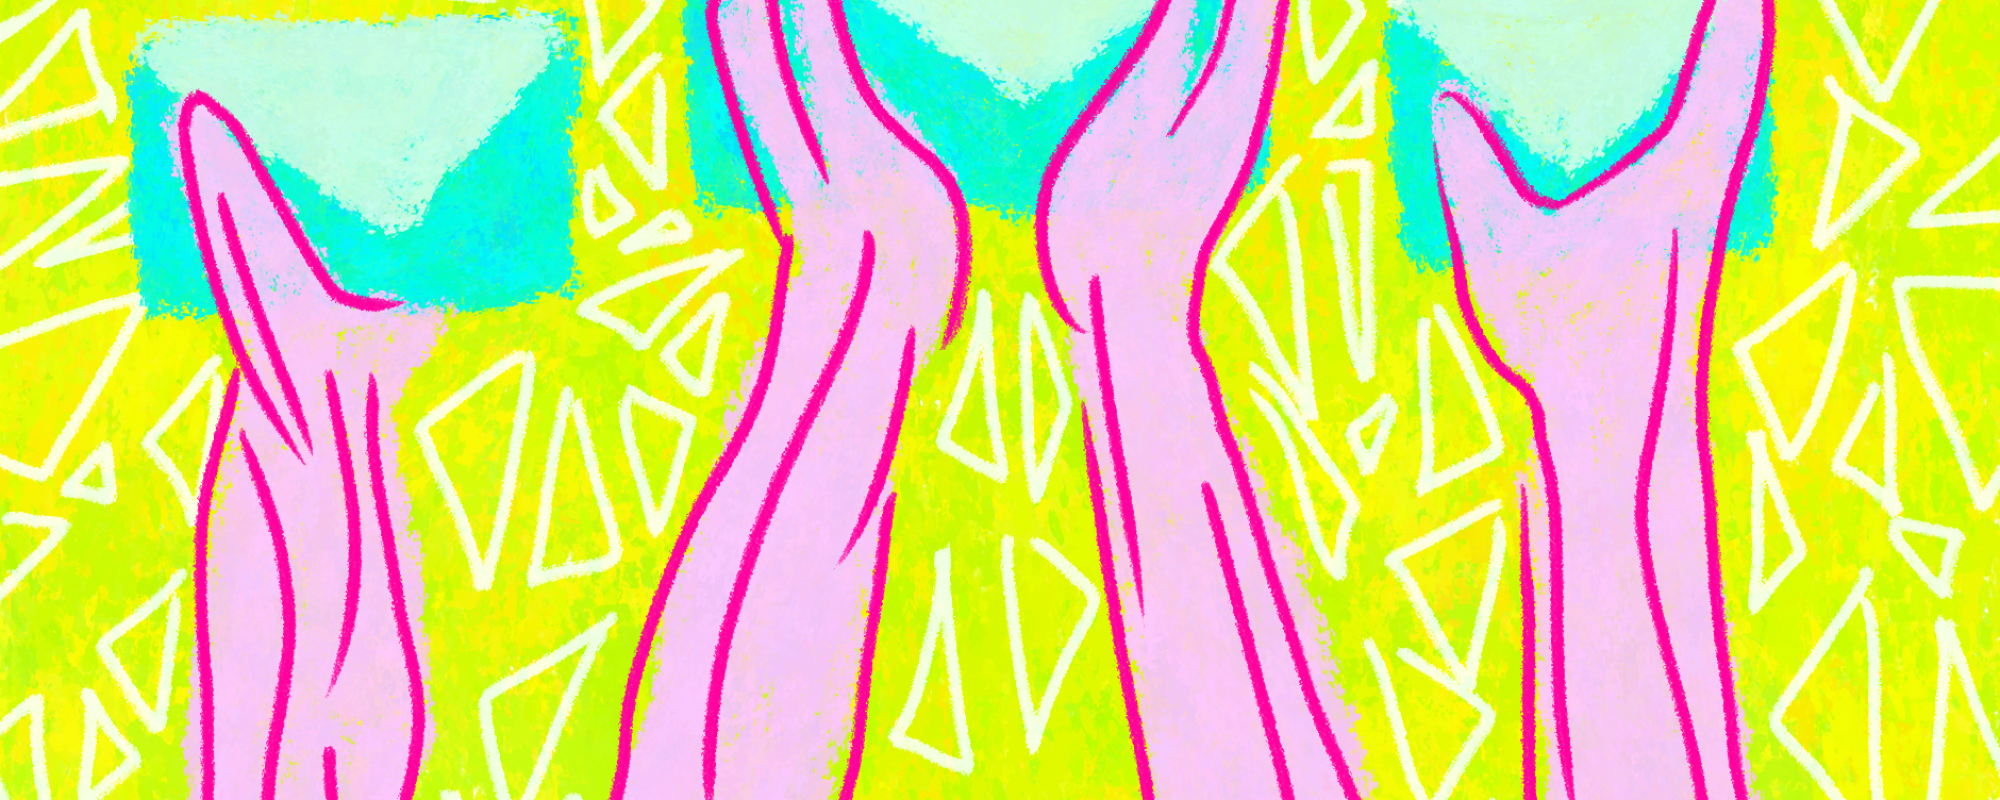 pink hands hold up light blue envelopes a bright green-yellow background